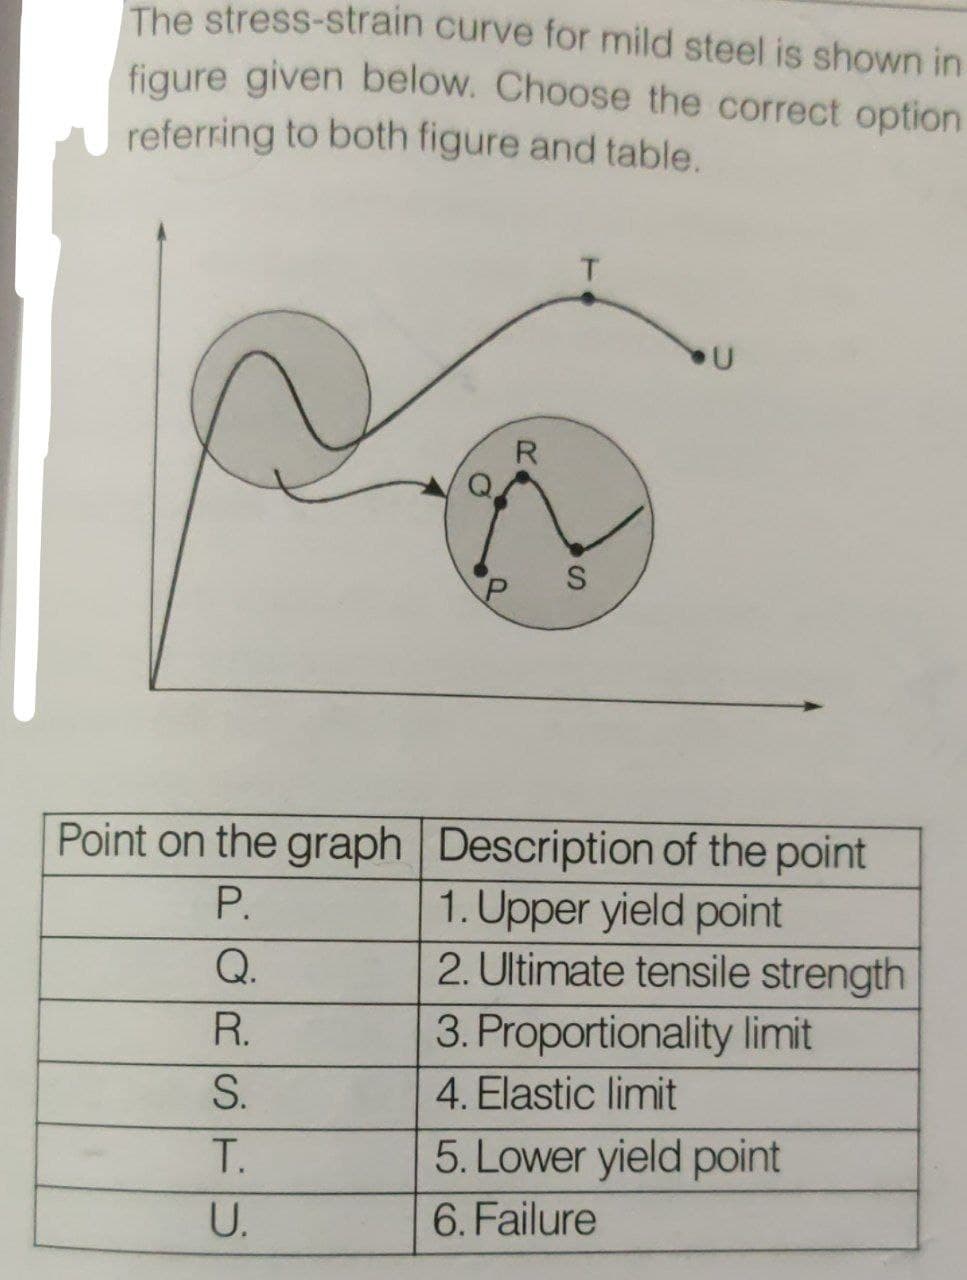 The stress-strain curve for mild steel is shown in
figure given below. Choose the correct option
referring to both figure and table.
R
Q.
R.
S.
T.
U.
S
U
Point on the graph Description of the point
P.
1. Upper yield point
2. Ultimate tensile strength
3. Proportionality limit
4. Elastic limit
5. Lower yield point
6. Failure